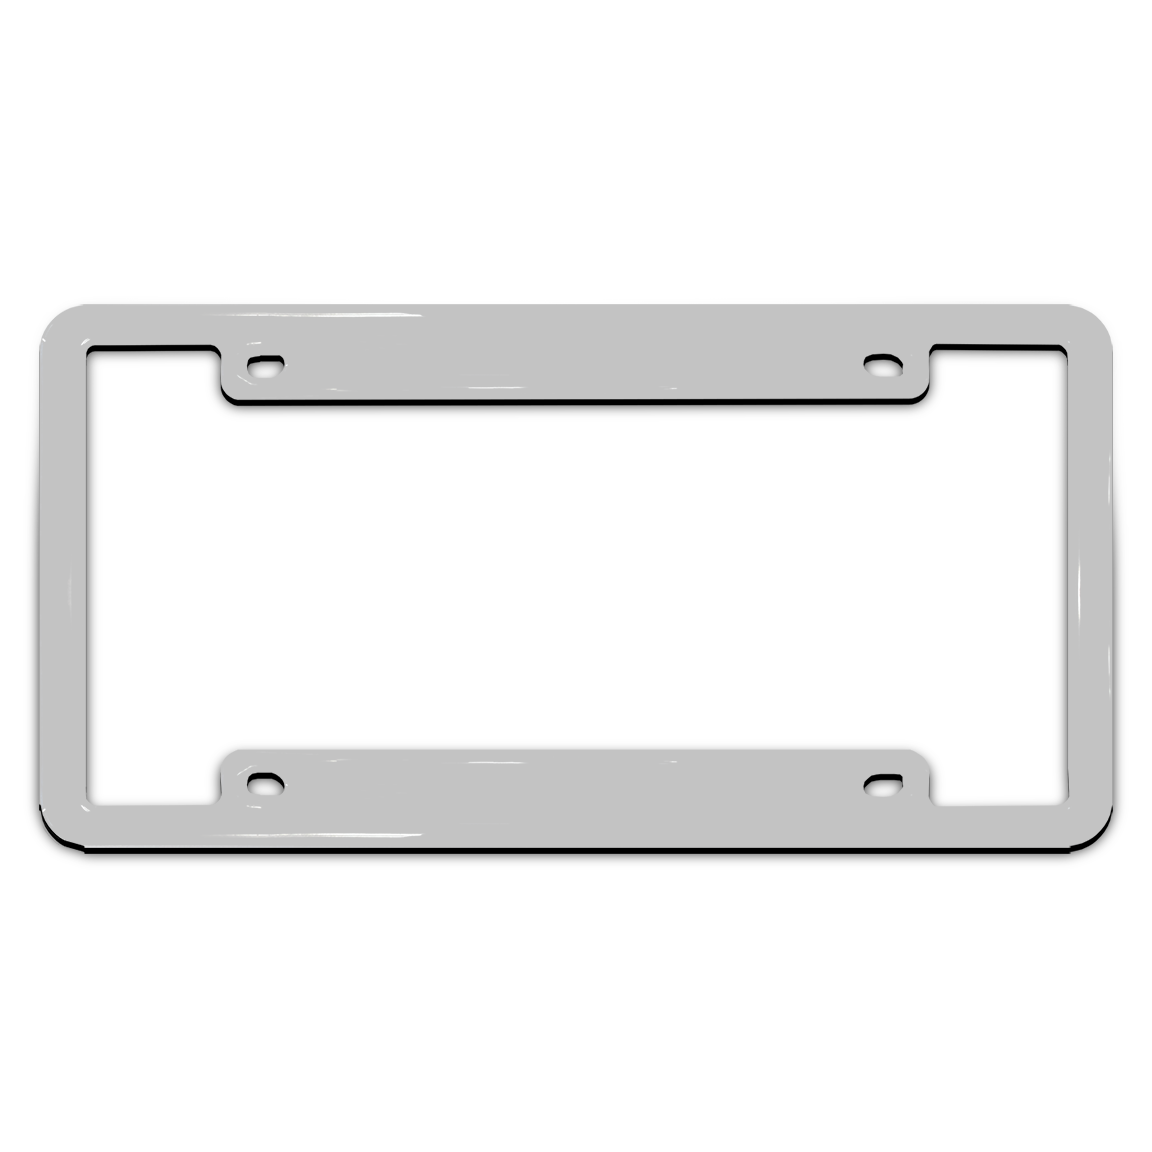 Personalized License Plate Frame Designer with Customizable Color & Text